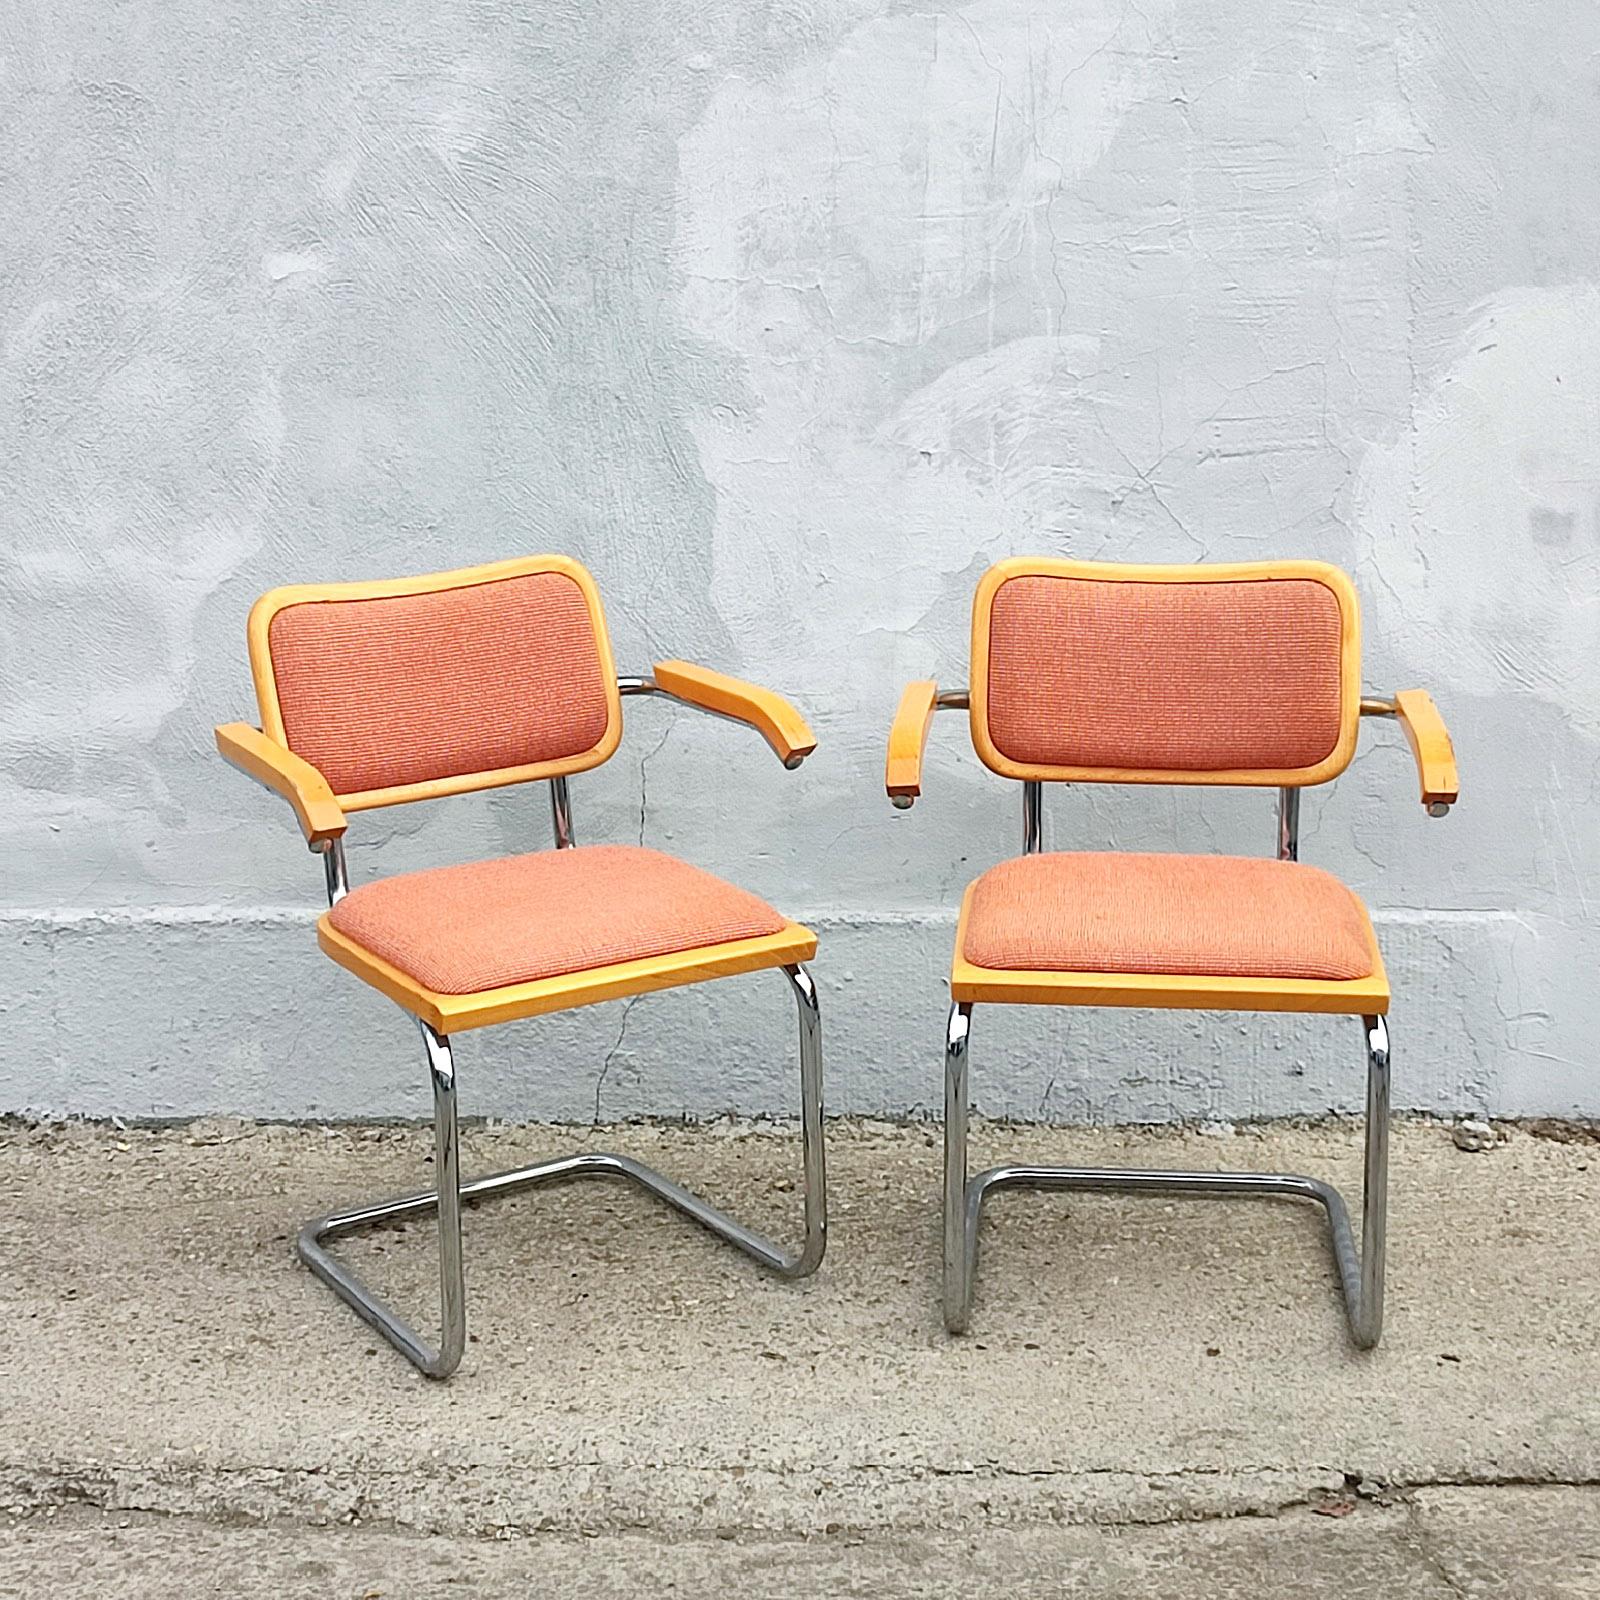 Italian Pair of Wood Upholstery and Nickel Cesca Armchairs Chairs, 1970s For Sale